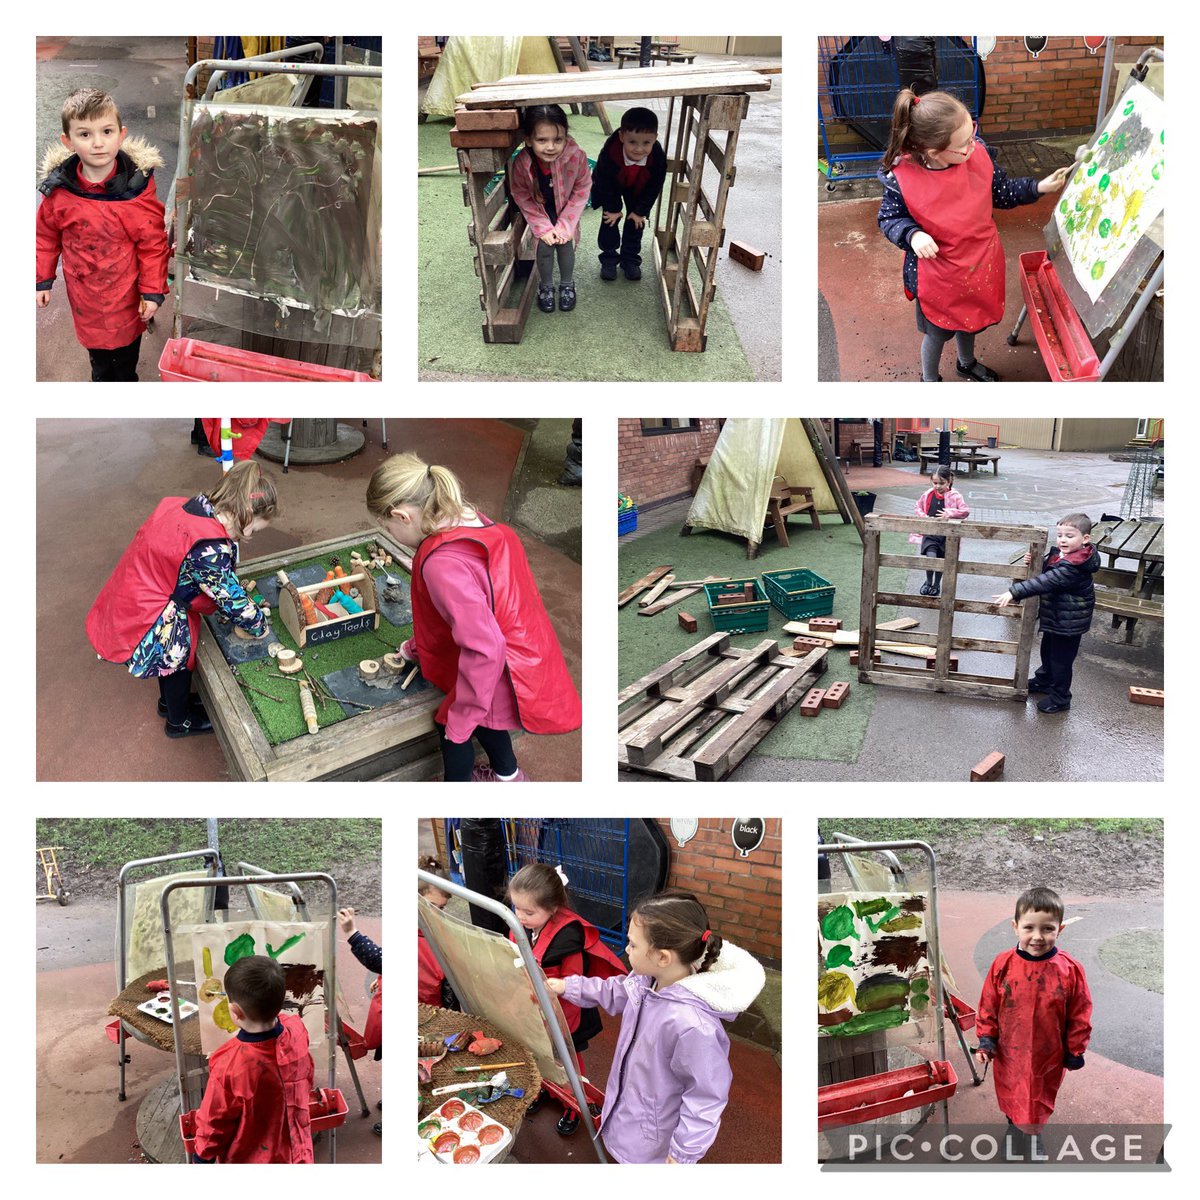 Reception have thoroughly enjoyed exploring the outdoors this week. They have painted, made clay models and built a den using a range of materials. A great first week back ⭐️@NantYParcSchool